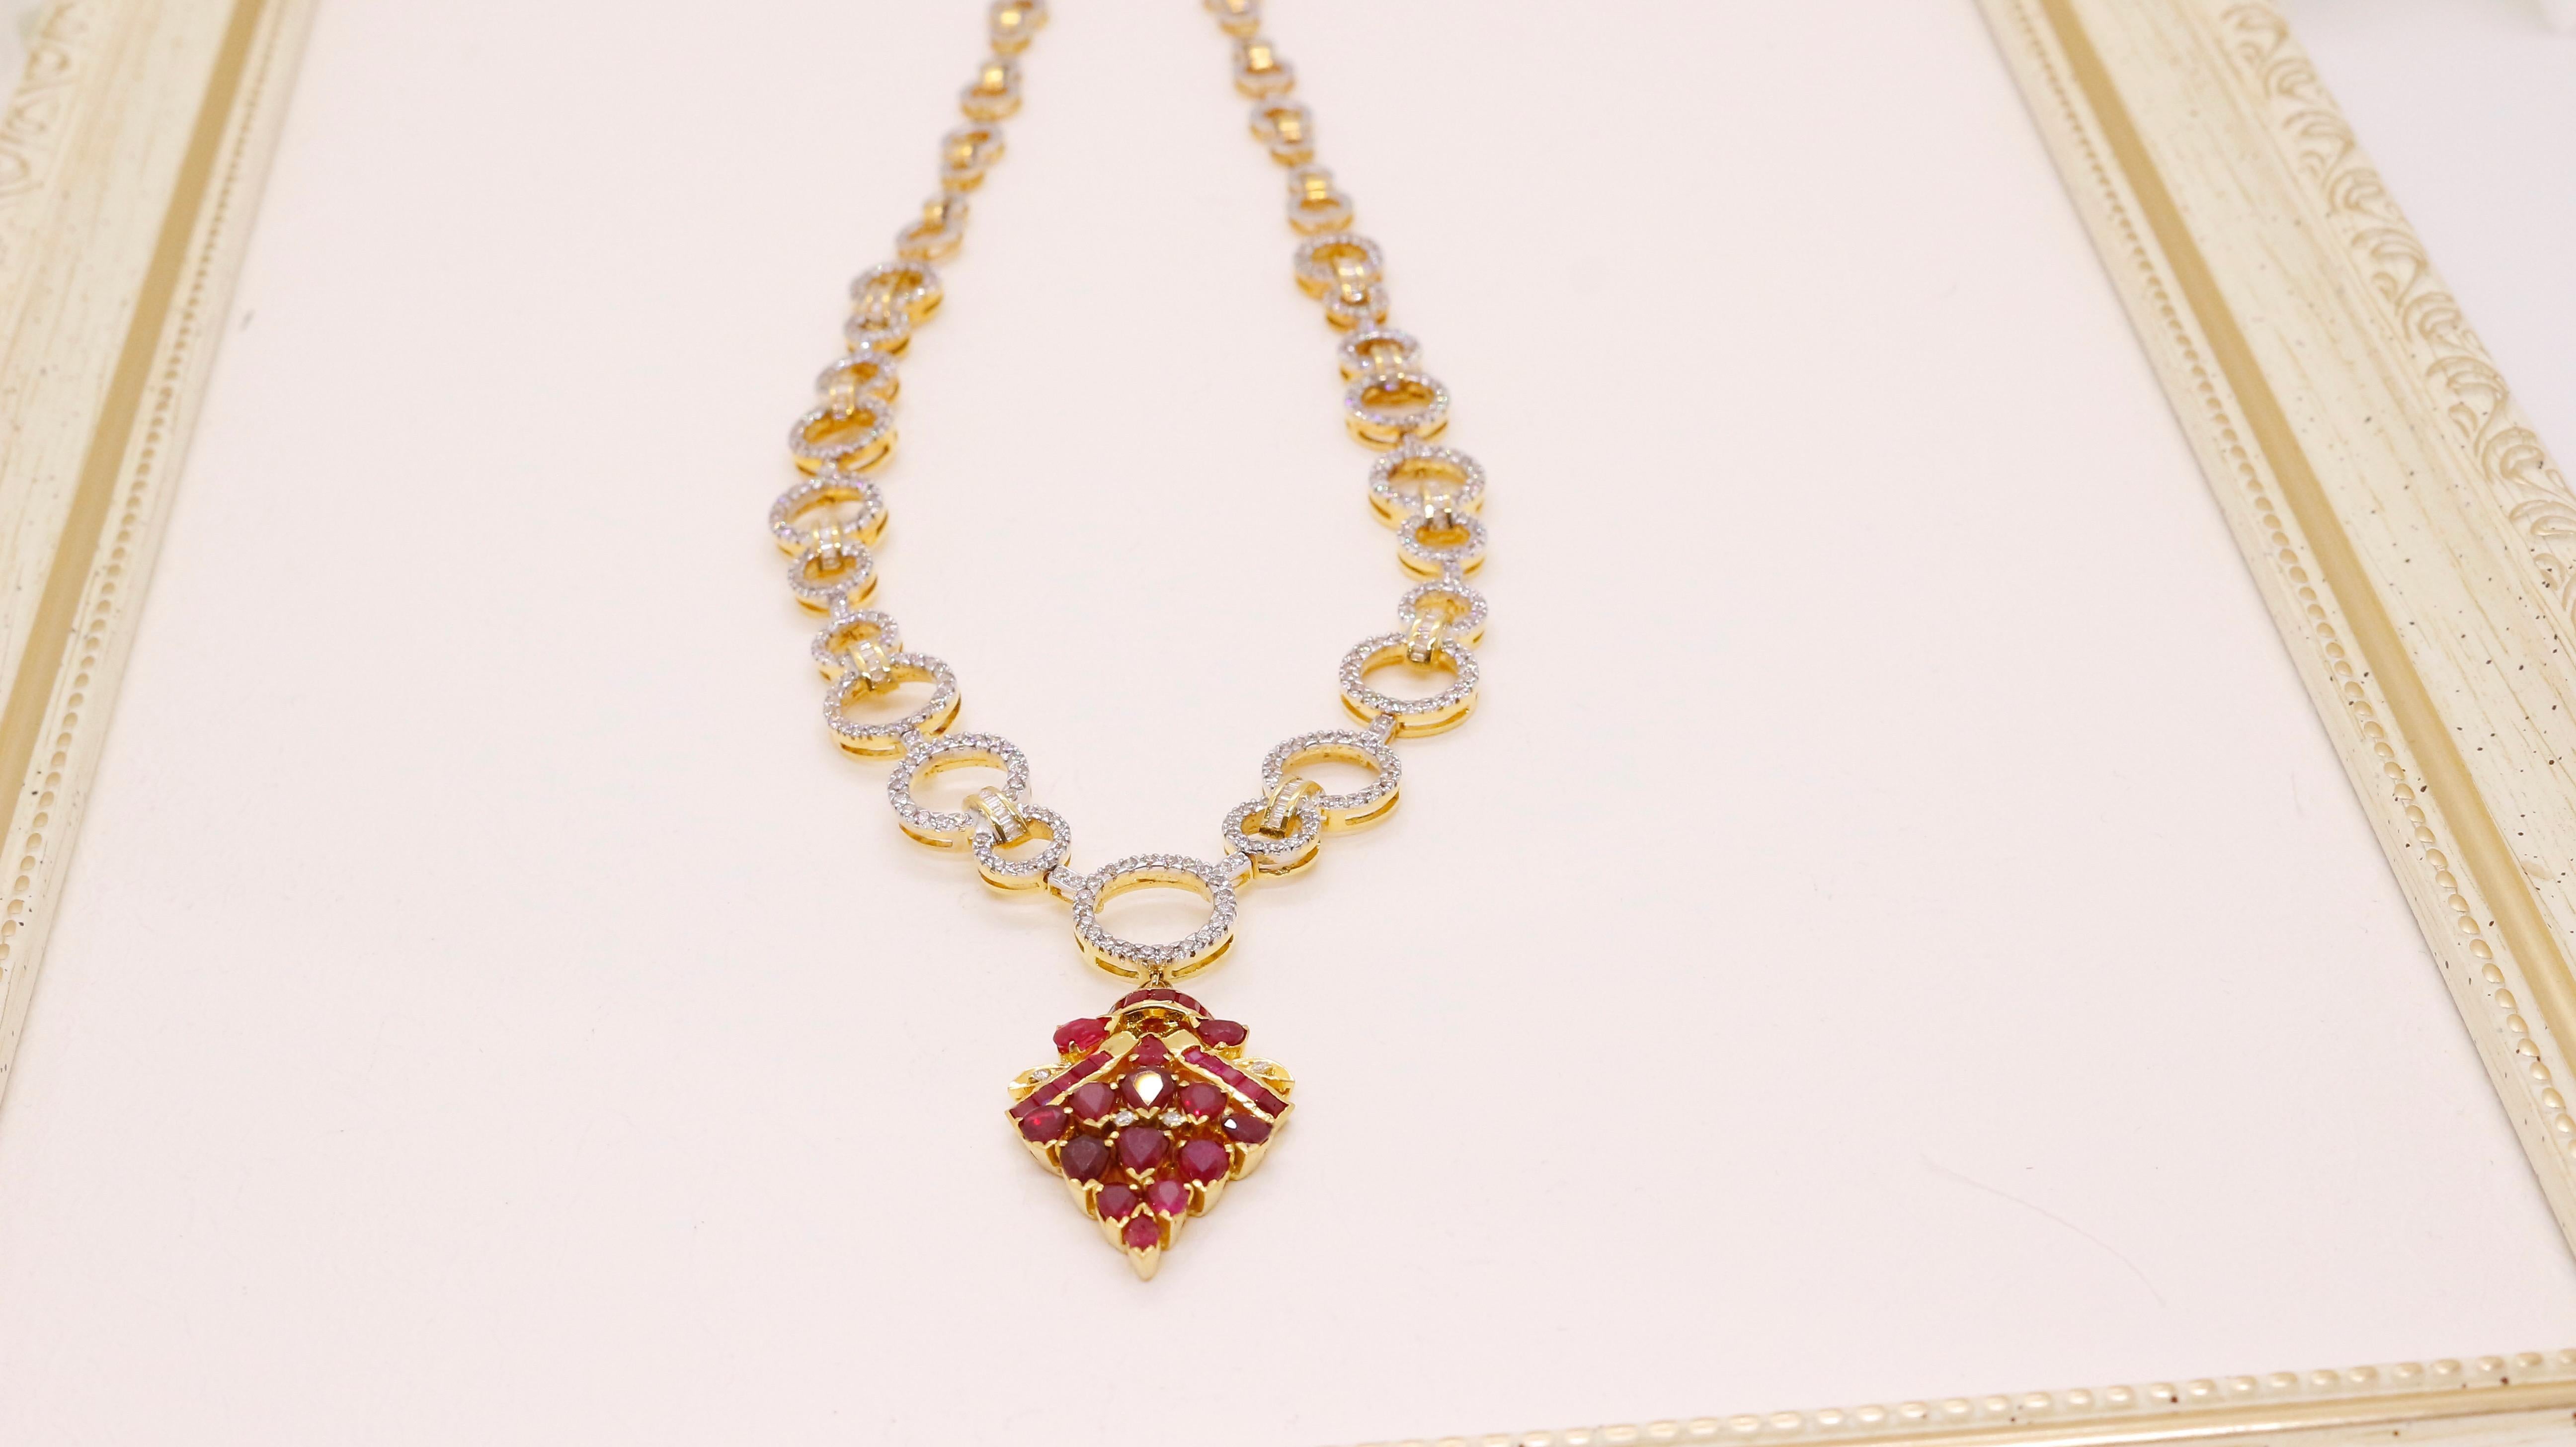 Adorn yourself with the captivating beauty of our Ruby Bouquet Necklace. This exquisite bouquet pendant necklace features a stunning cluster of vibrant rubies that symbolize love and passion styled like a flower bouquet. The lustrous rubies are